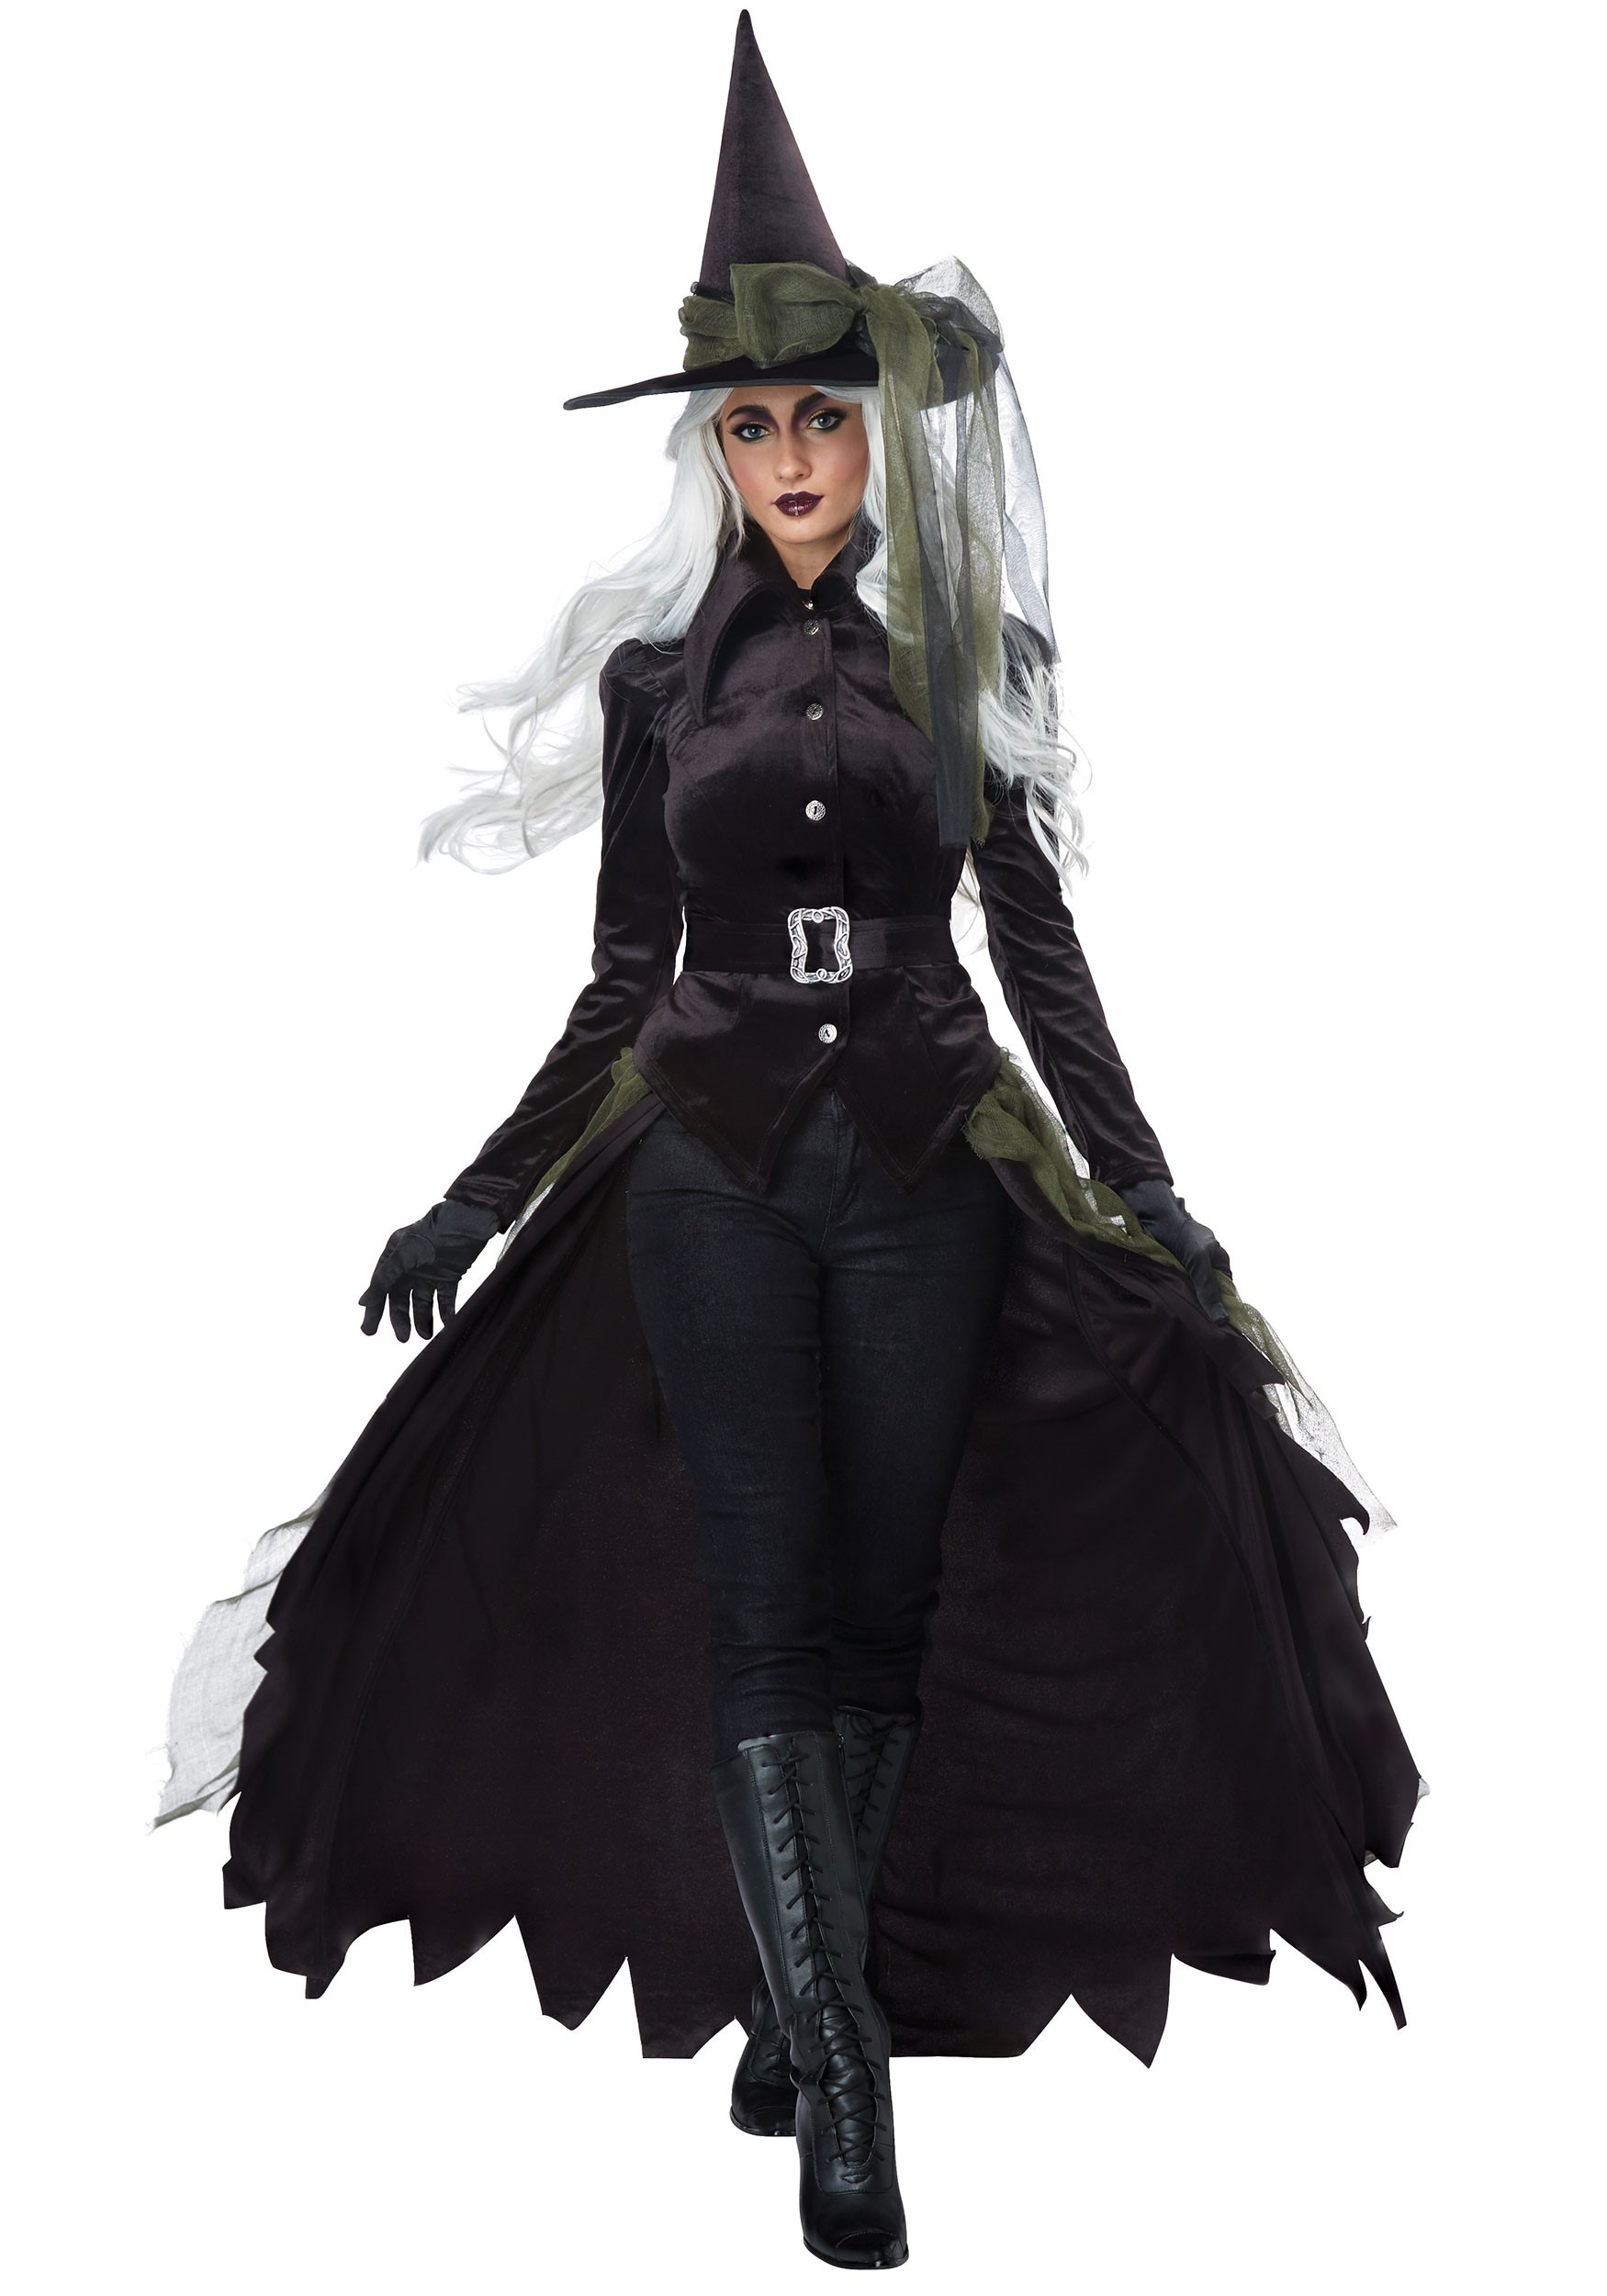 Cool Witch AdultCostume